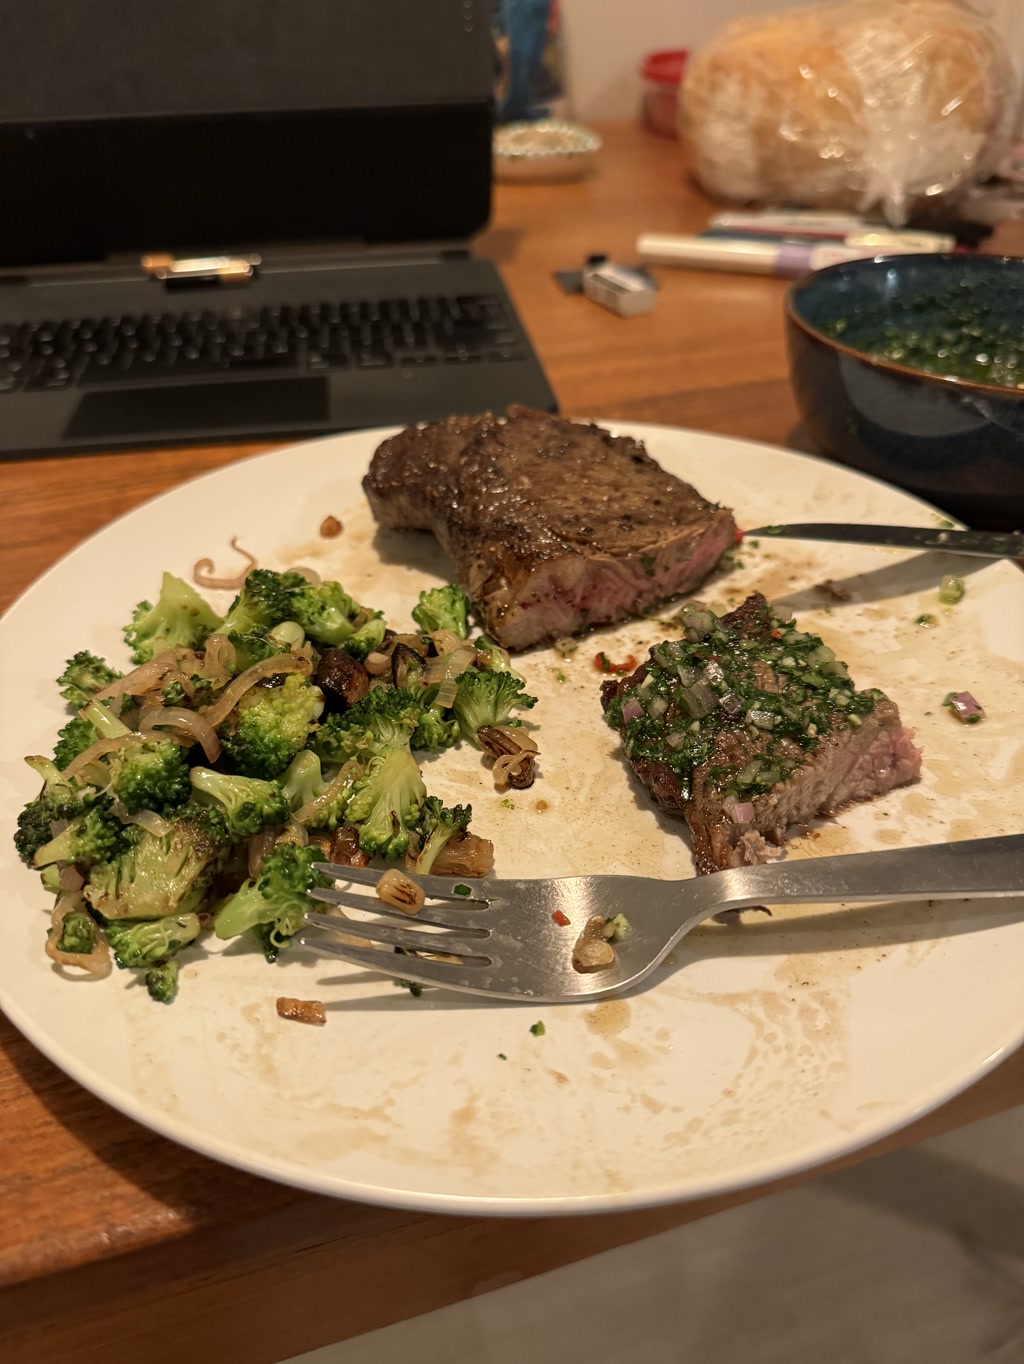 A meal consisting of a cooked steak and sautéed broccoli is on a white plate. The steak is cooked to a medium rare doneness and appears juicy with a well-seared crust sprinkled with chopped herbs. The broccoli is cooked with bits of garlic and possibly onions. The plate is on a wooden table where a laptop, a blue bowl, and various other objects such as a loaf of bread in a clear bag, pens, and a small silver object are also visible.